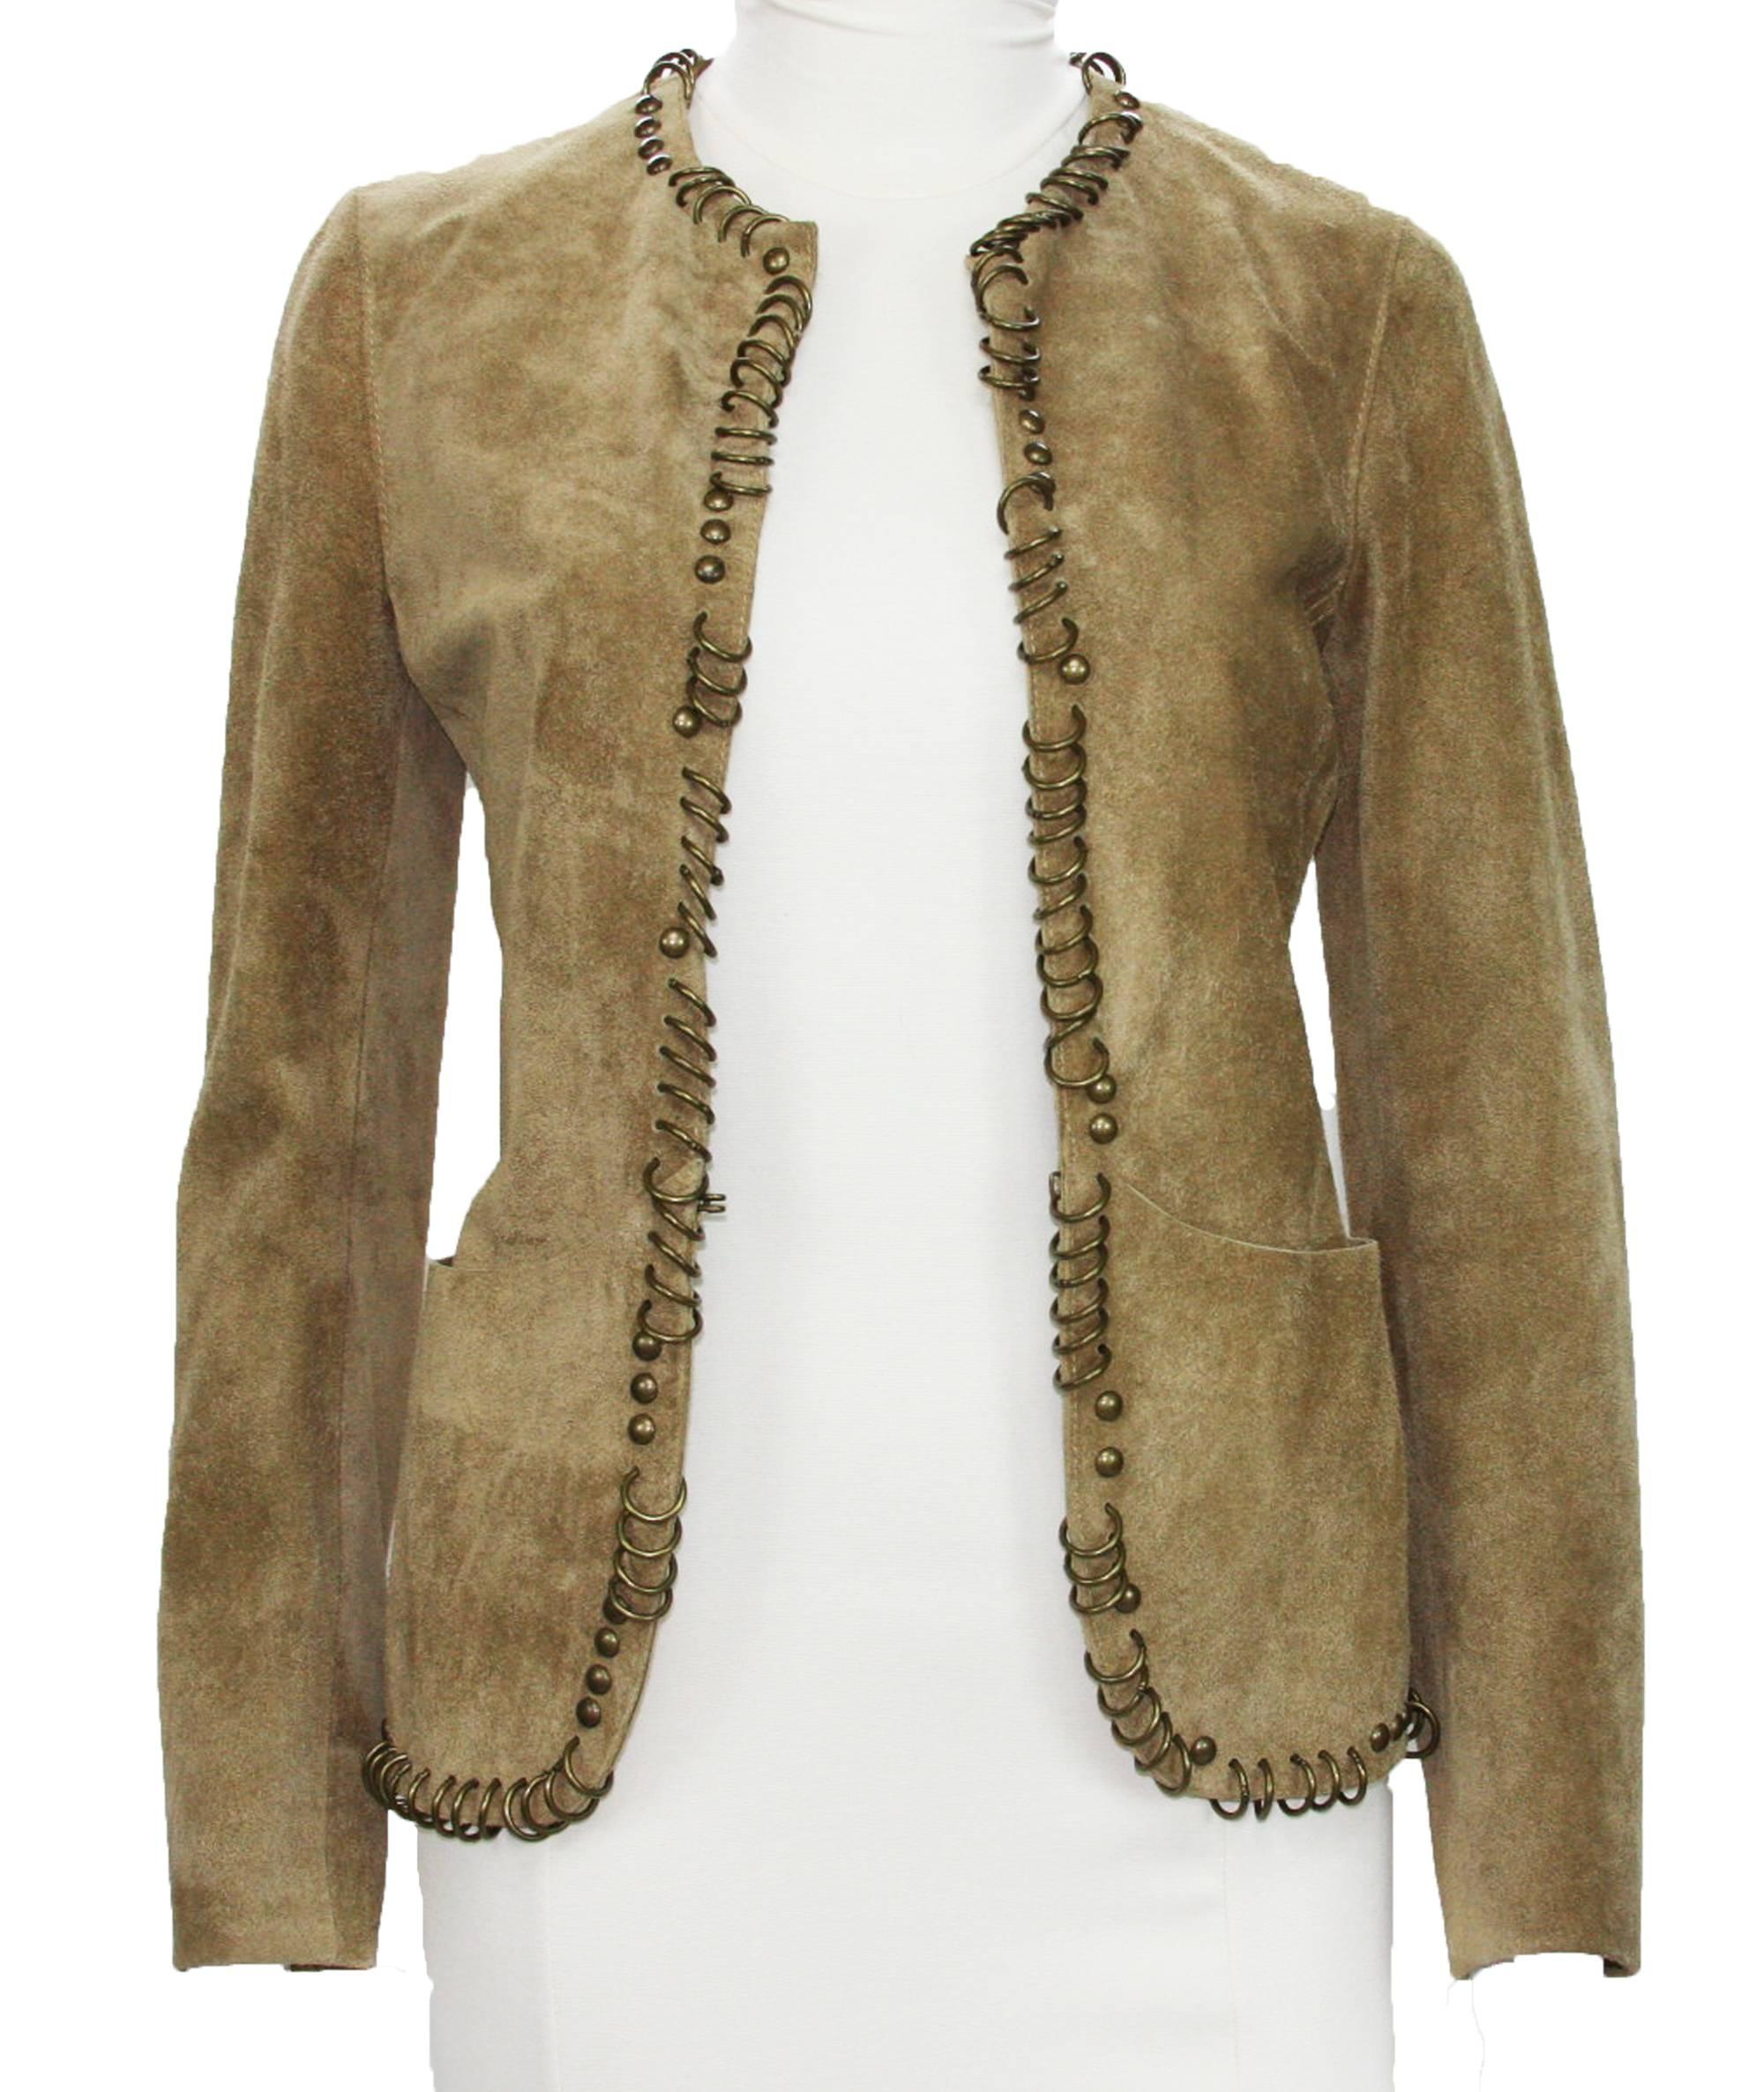 New Tom Ford for Yves Saint Laurent Suede Jacket
2002 Collection
Designer Size 36 - US 2
Color - Beige
Embellished with Brass Ring and Studs
Features Patch Pockets at Hem
One Hook and Eye Closure
Measurements Flat: Length - 24 inches, Sleeve - 26,